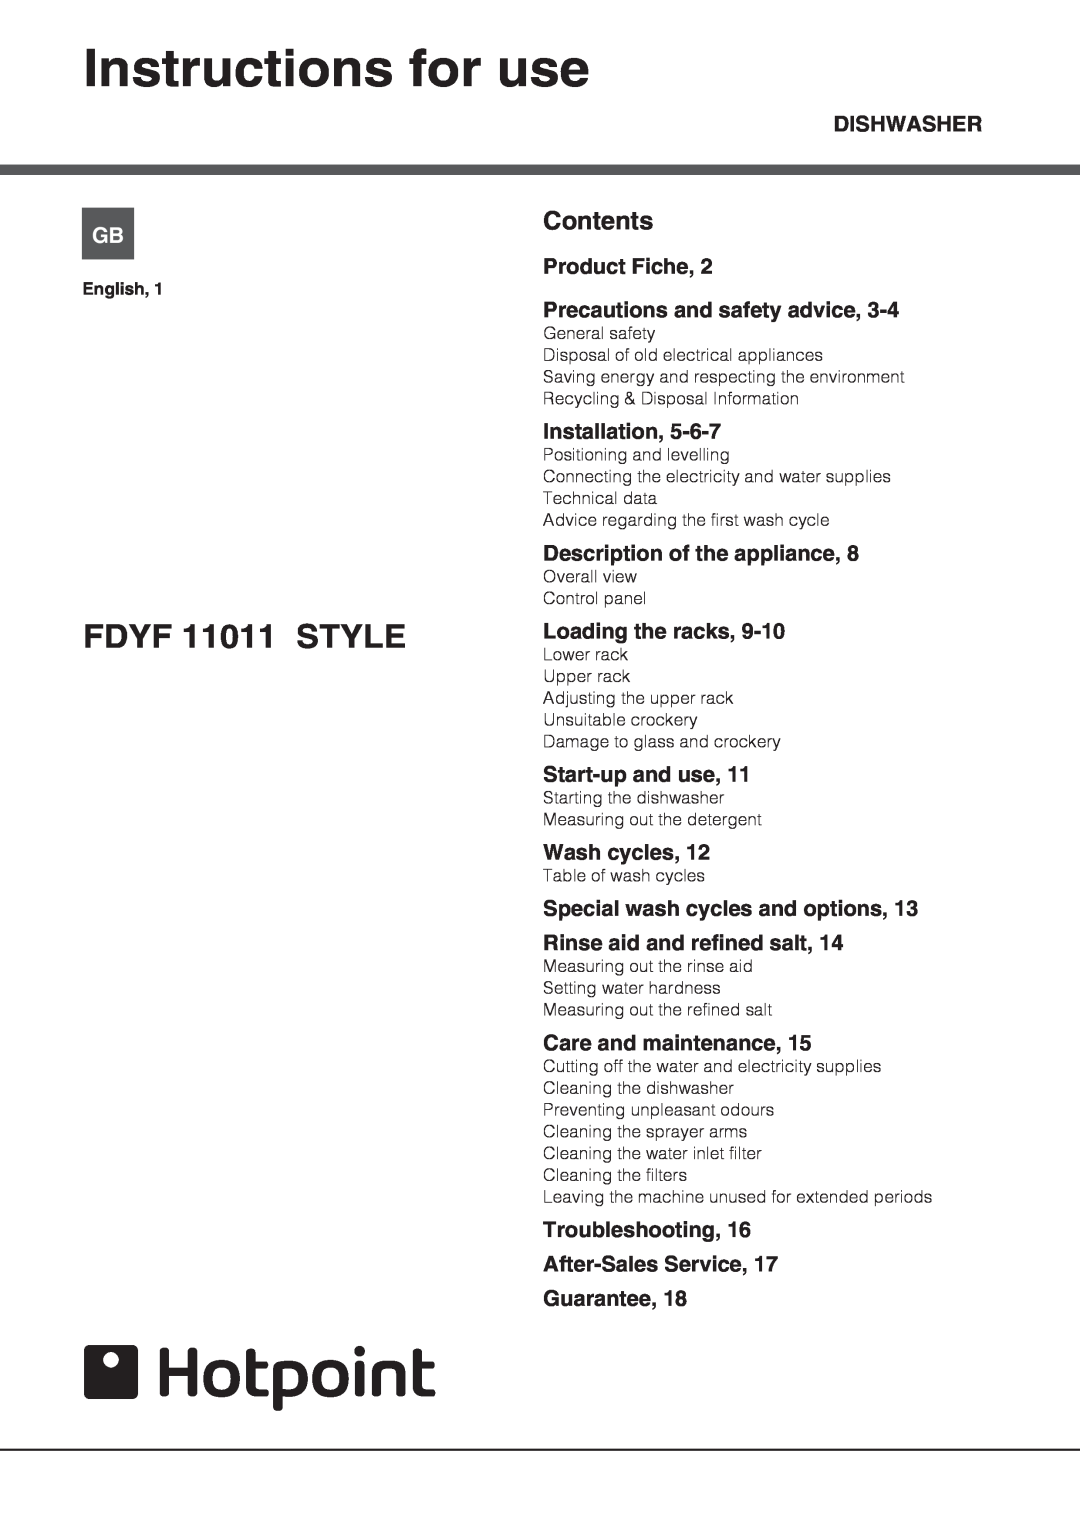 Hotpoint FDYF 11011 Style manual Instructions for use, FDYF 11011 STYLE, Contents 